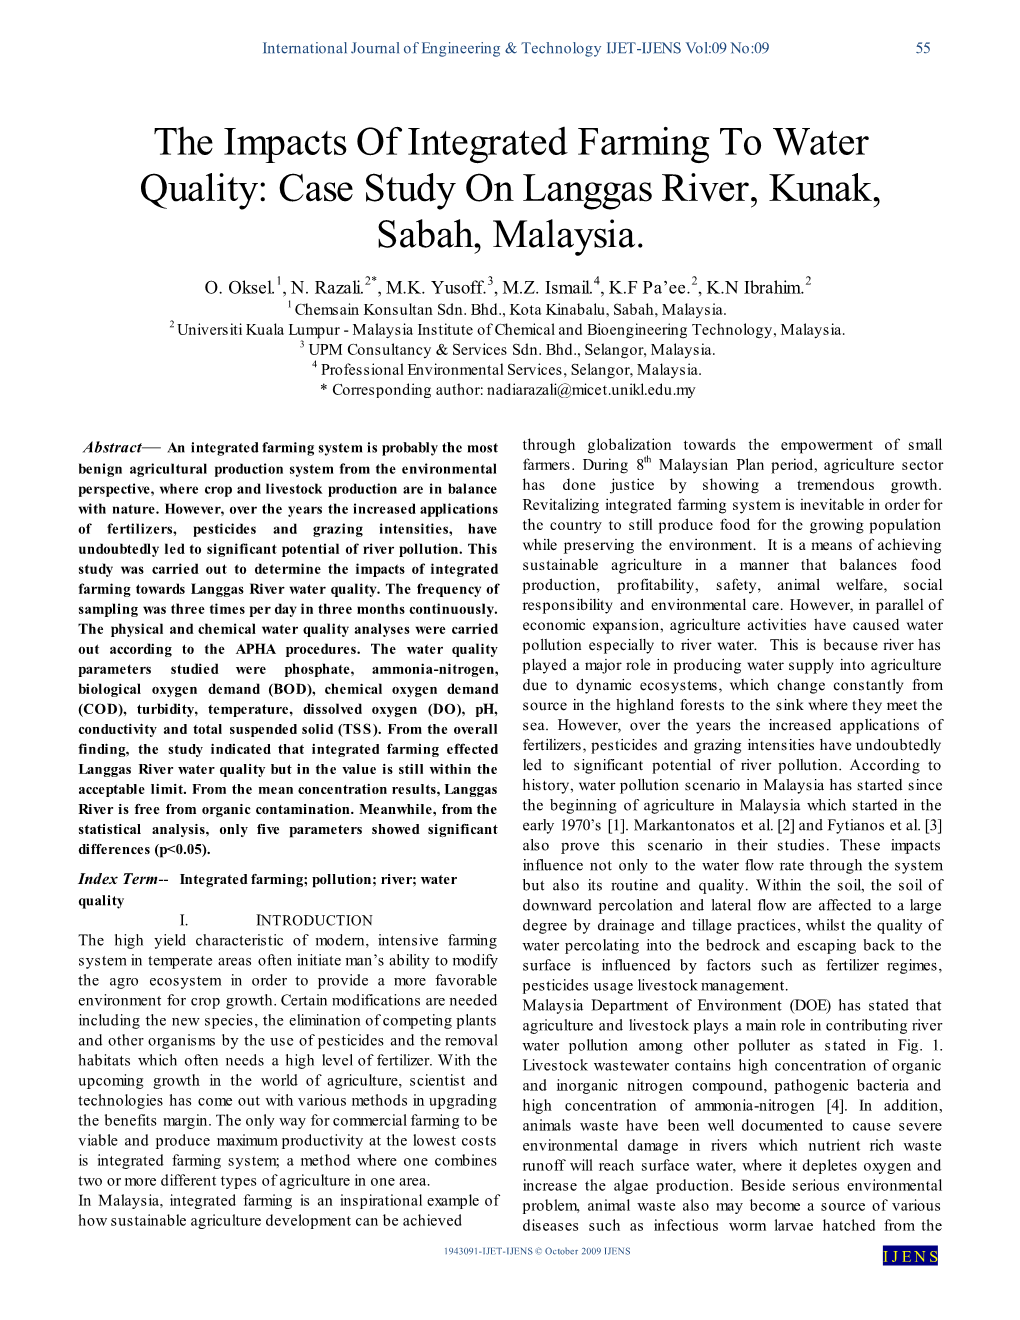 The Impacts of Integrated Farming to Water Quality: Case Study on Langgas River, Kunak, Sabah, Malaysia